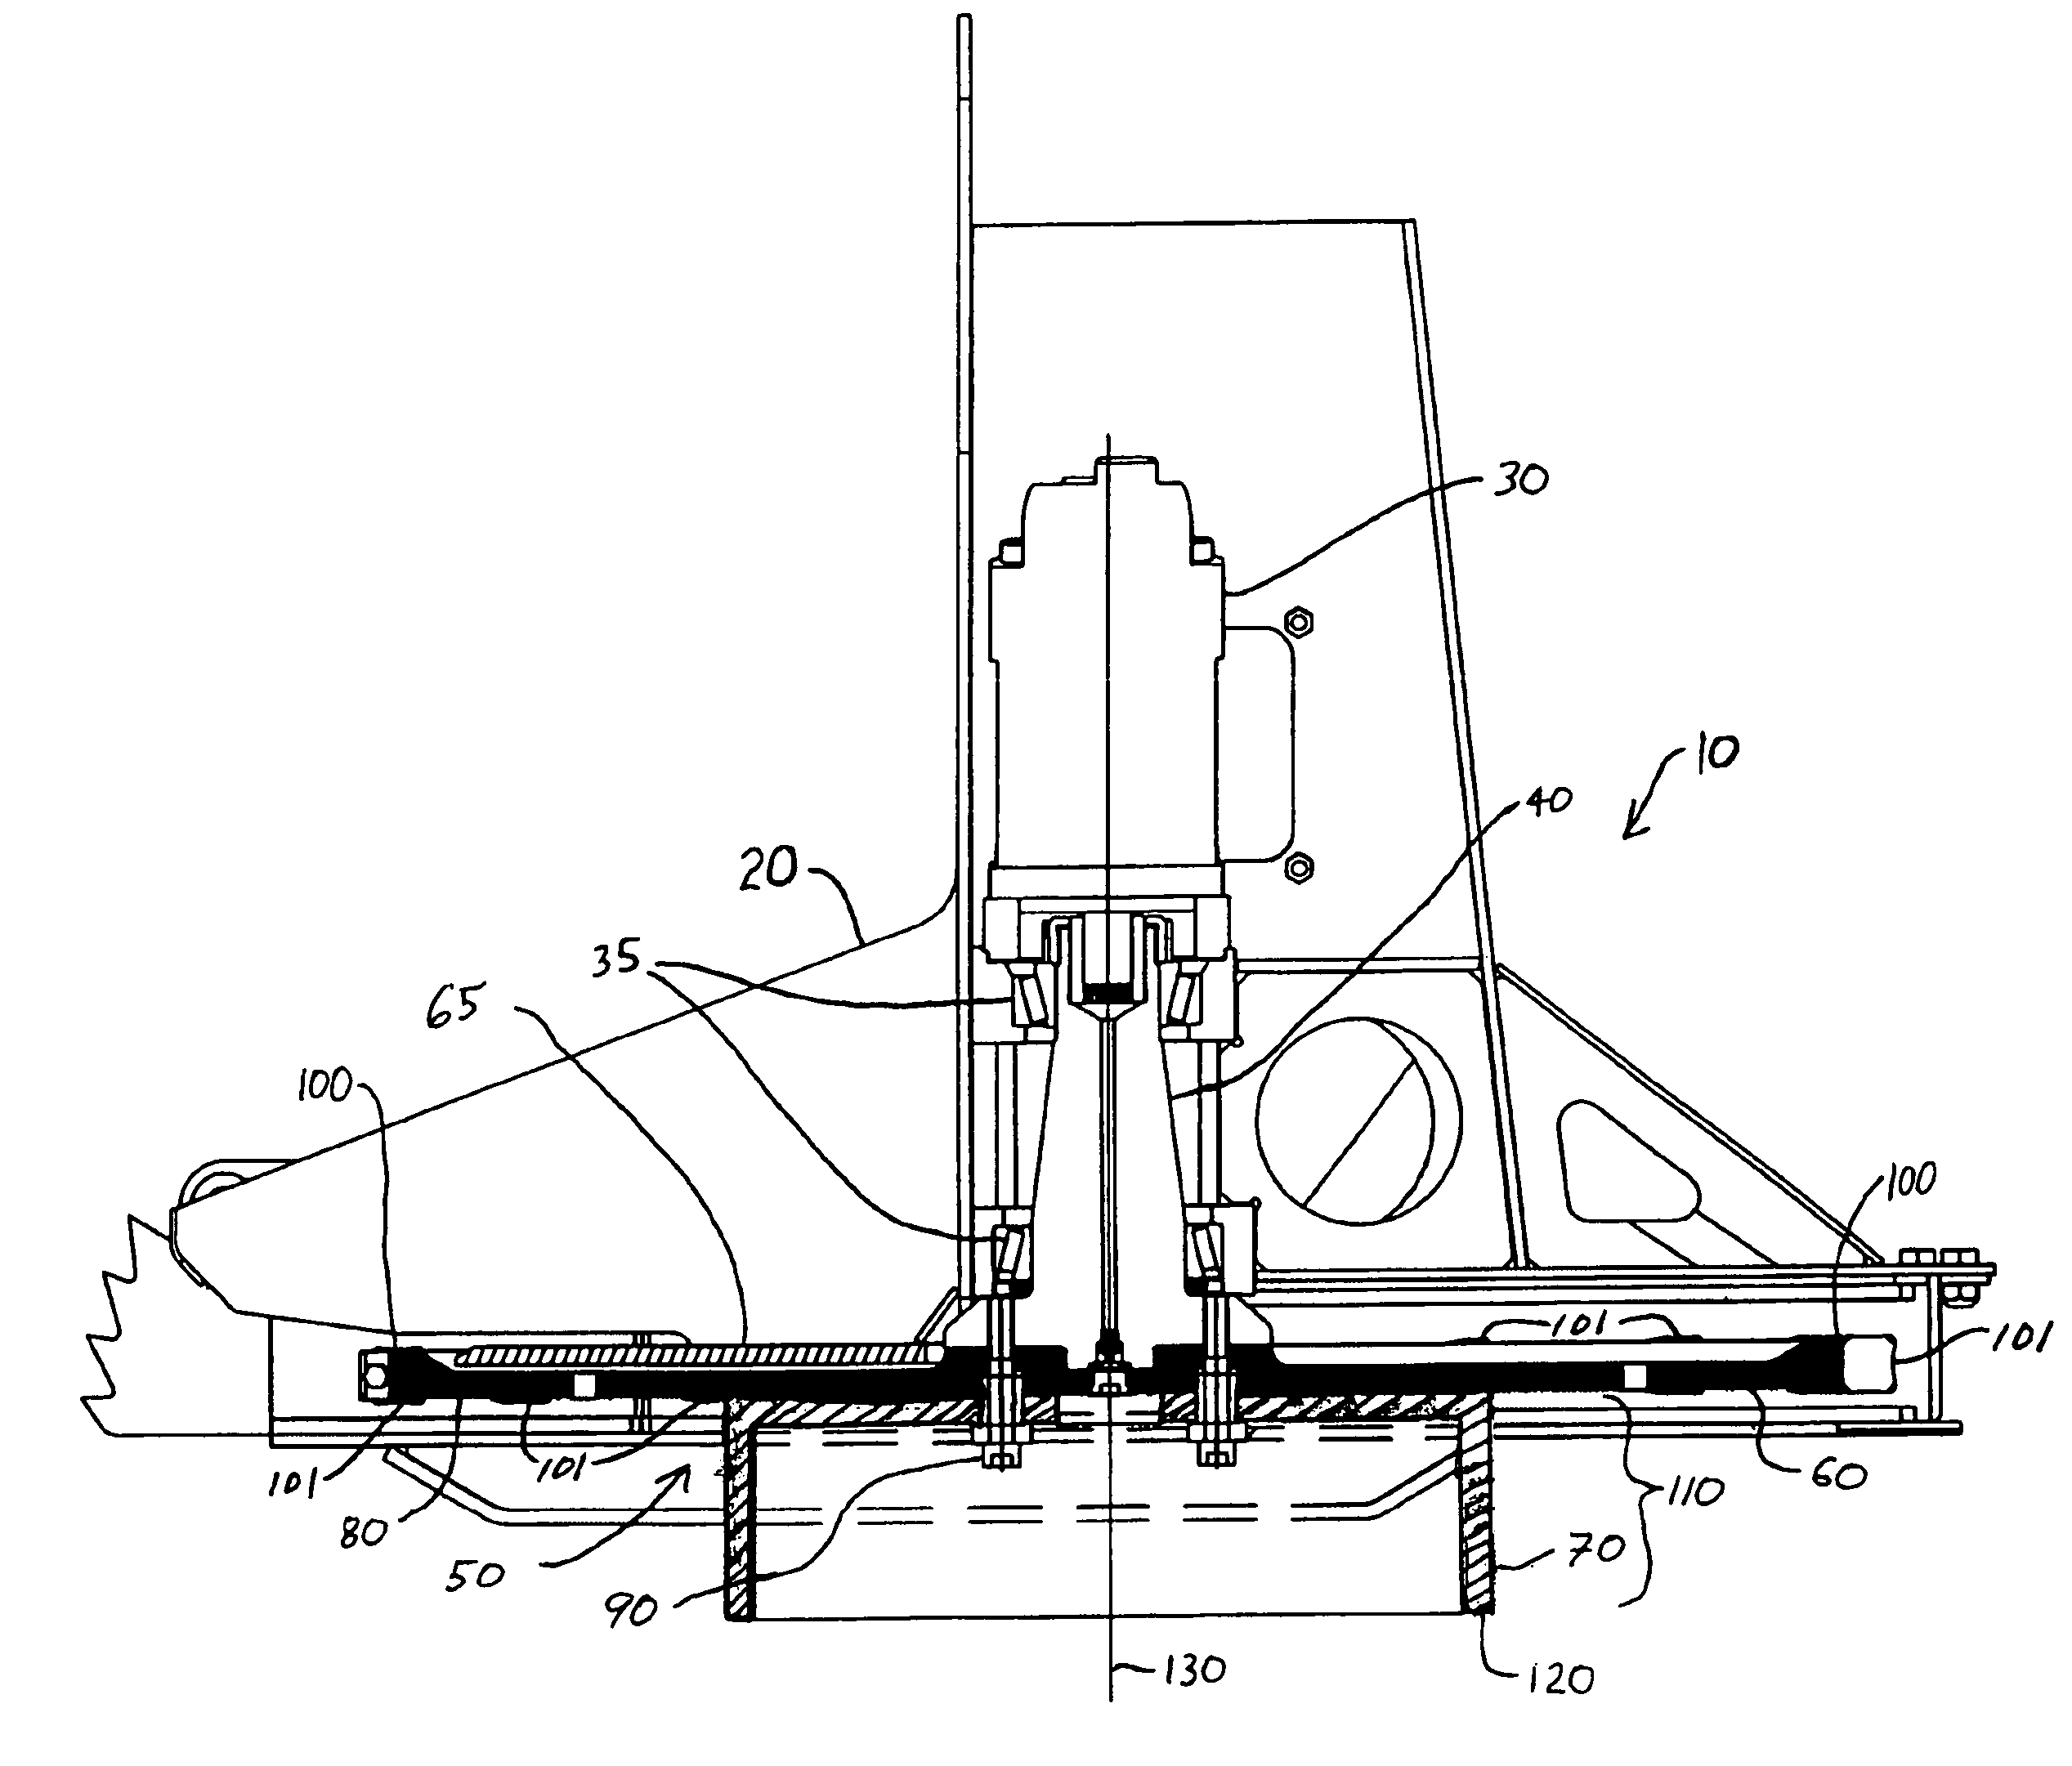 Apparatus and method for severing a tree and reducing the tree stump